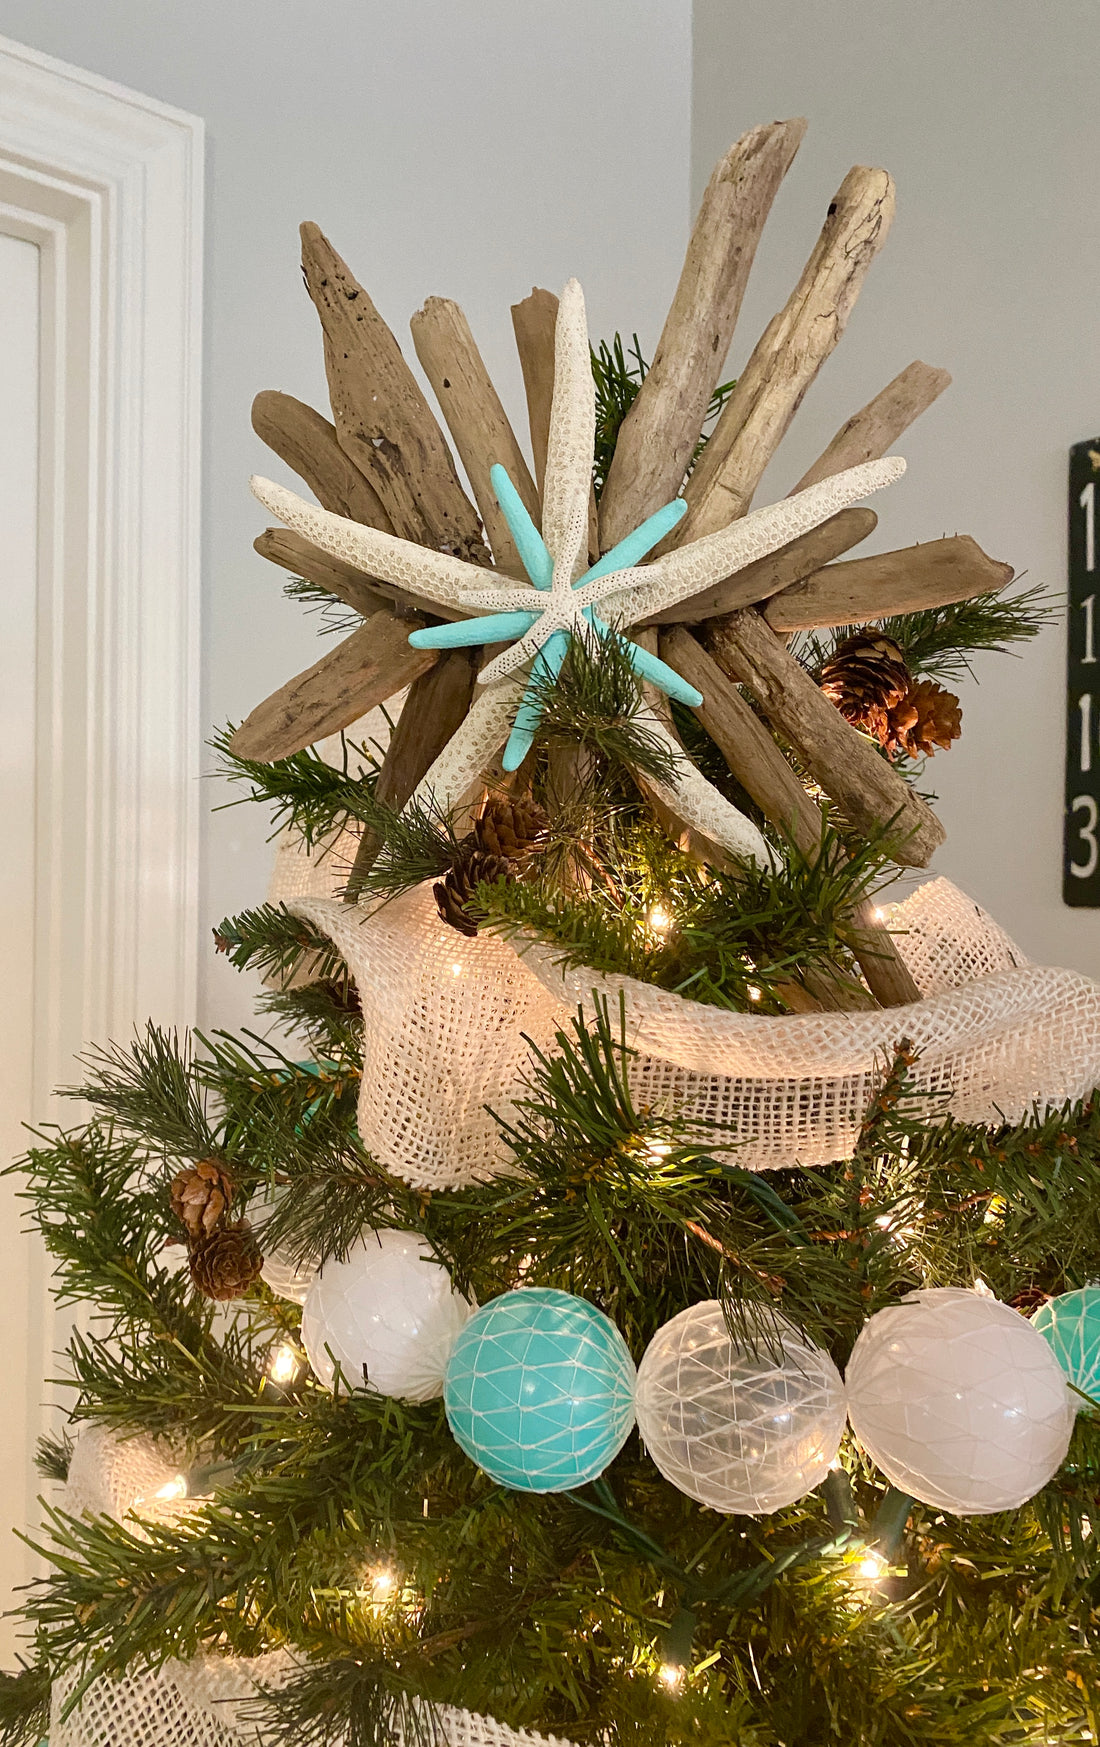 DIY coastal tree topper with starfish and driftwood